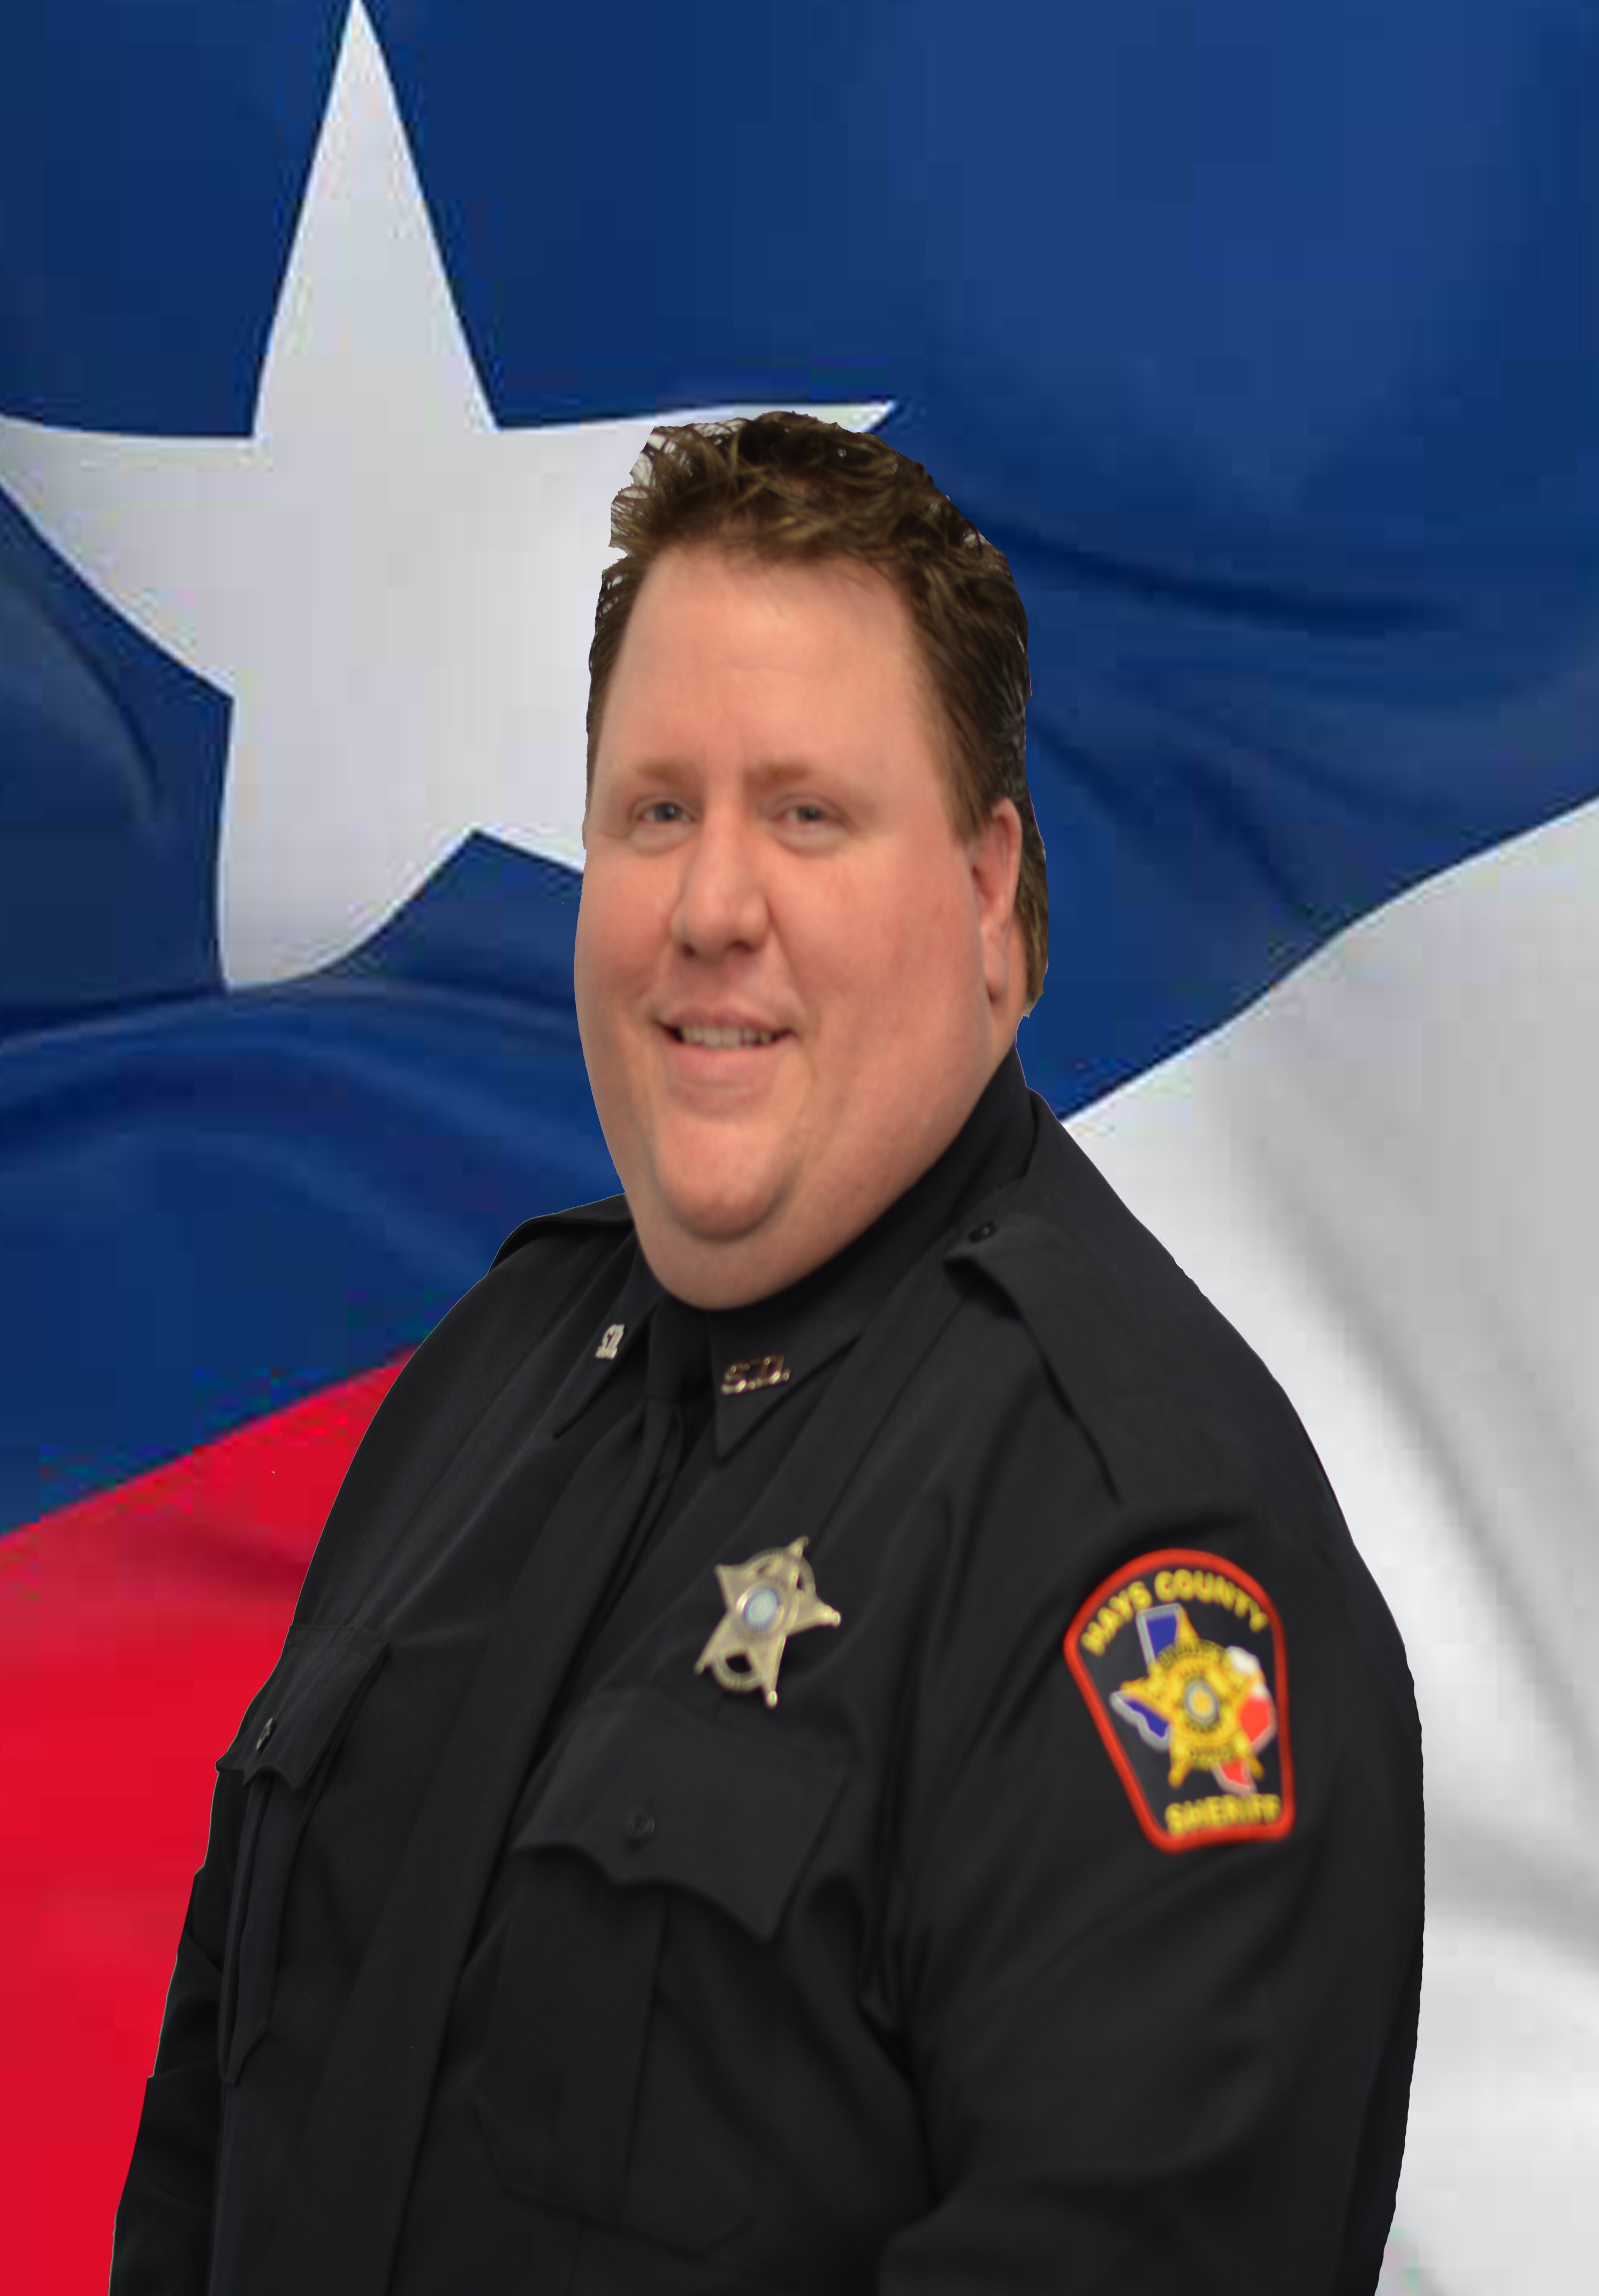 Corrections Officer James N. Henry | Hays County Sheriff's Office, Texas